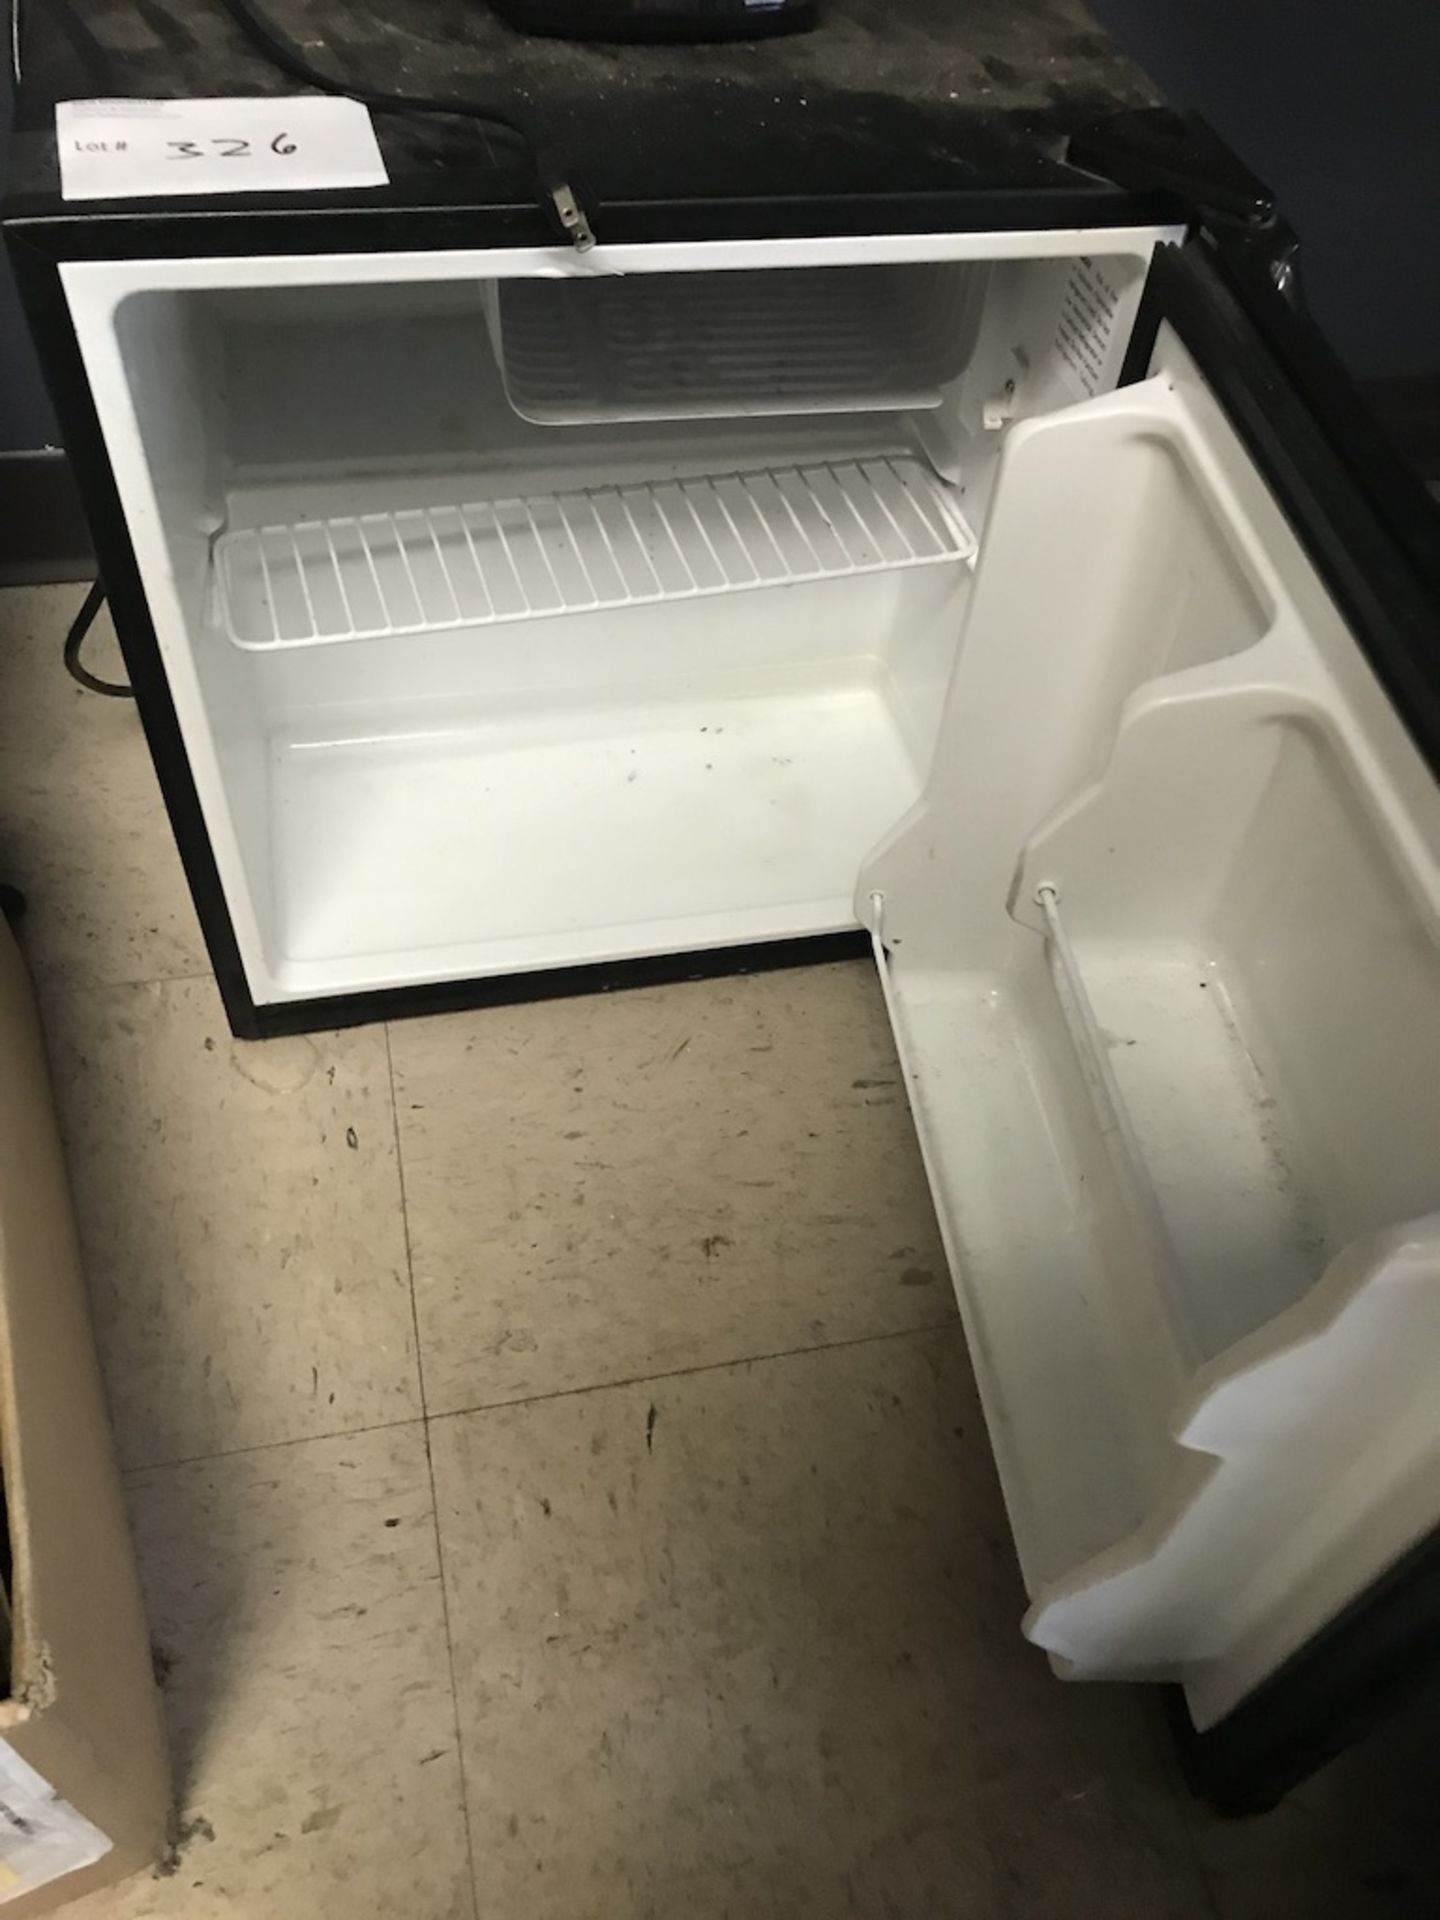 LOT OF: (1) HAIER MINI FRIDGE AND (1) 12 CUP MR. COFFEE - Image 2 of 4